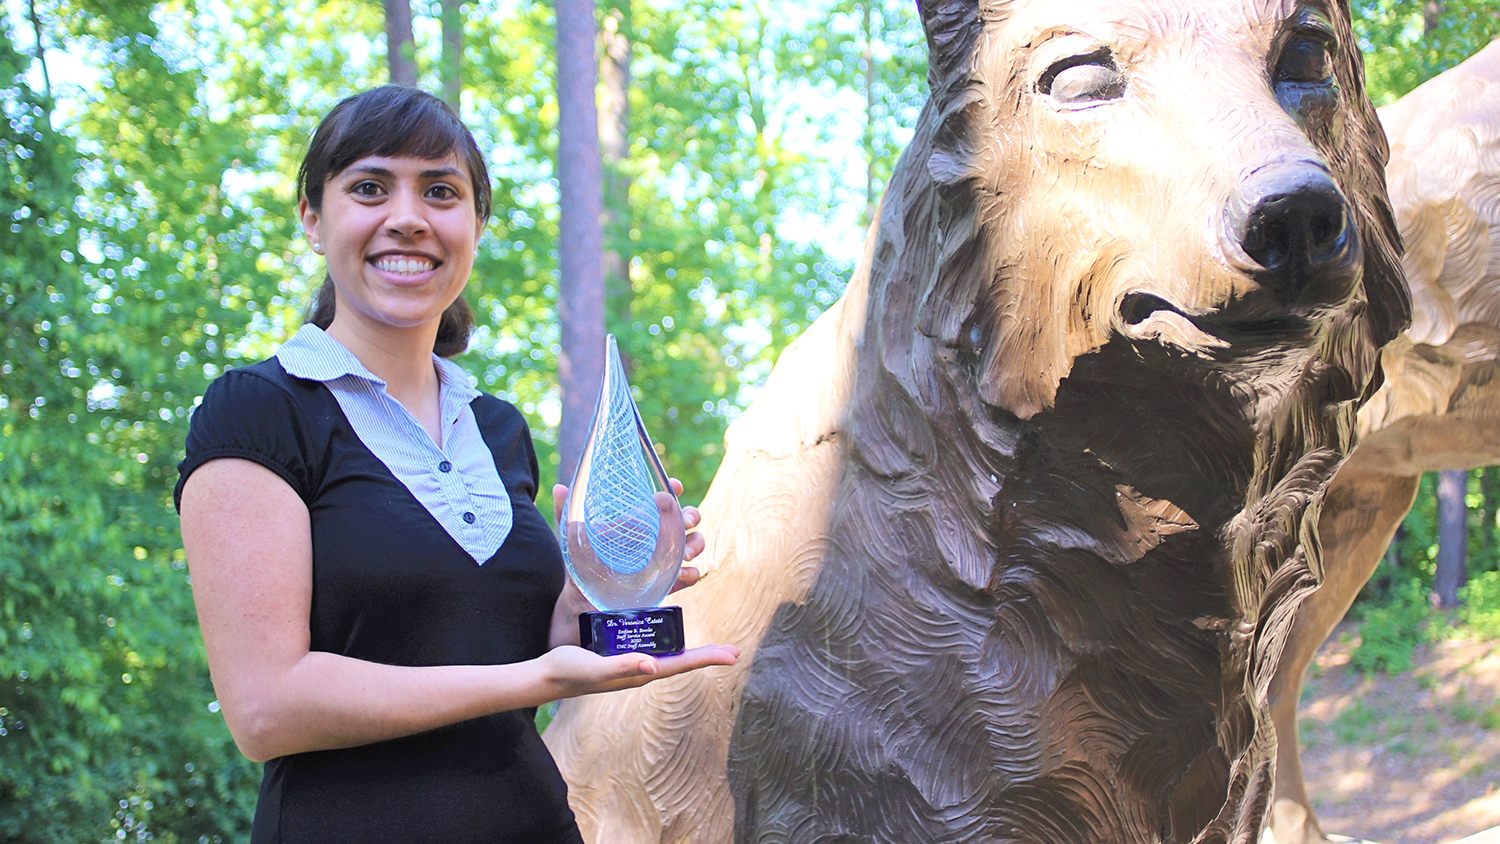 Veronica Cateté standing outside holding her award next to an sculpture of a wolf.